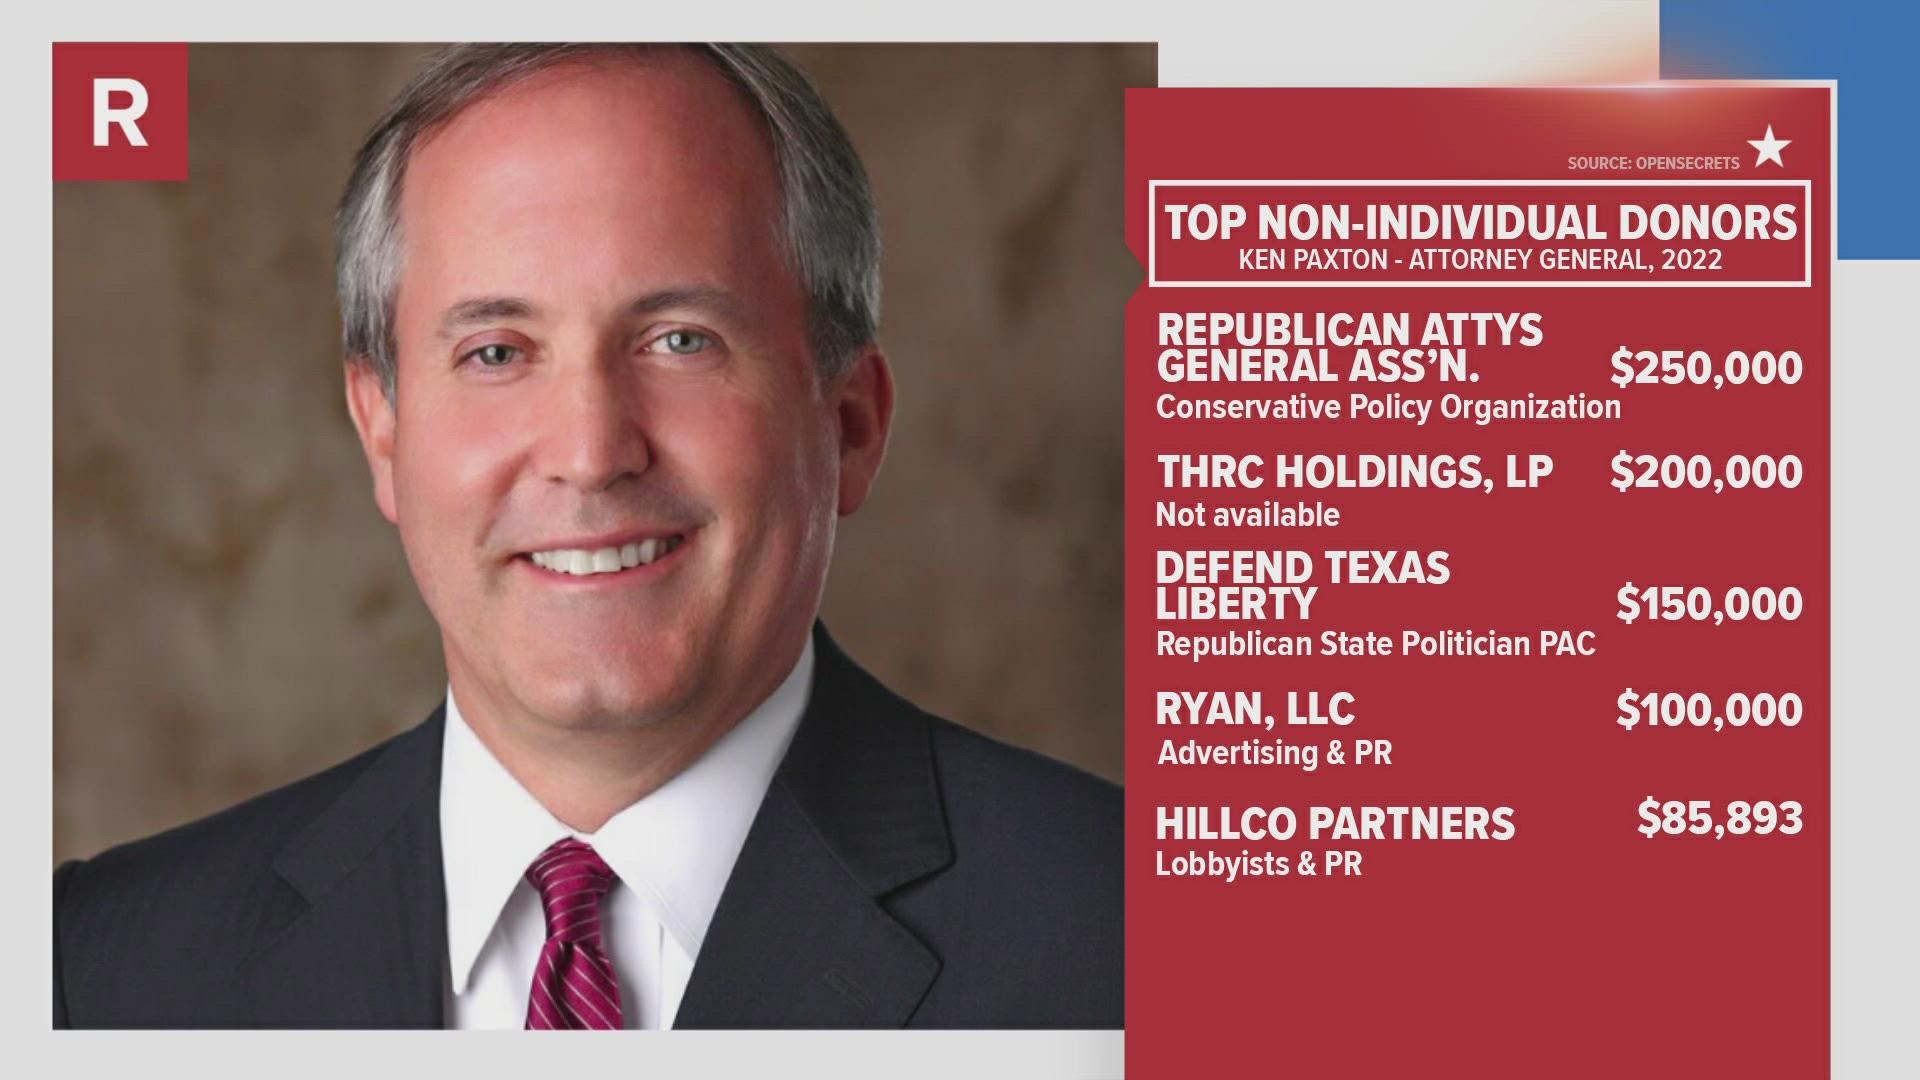 KVUE looked at who is giving the most to the state's top candidates. Here are the totals for the non-individual donors in the attorney general's race.